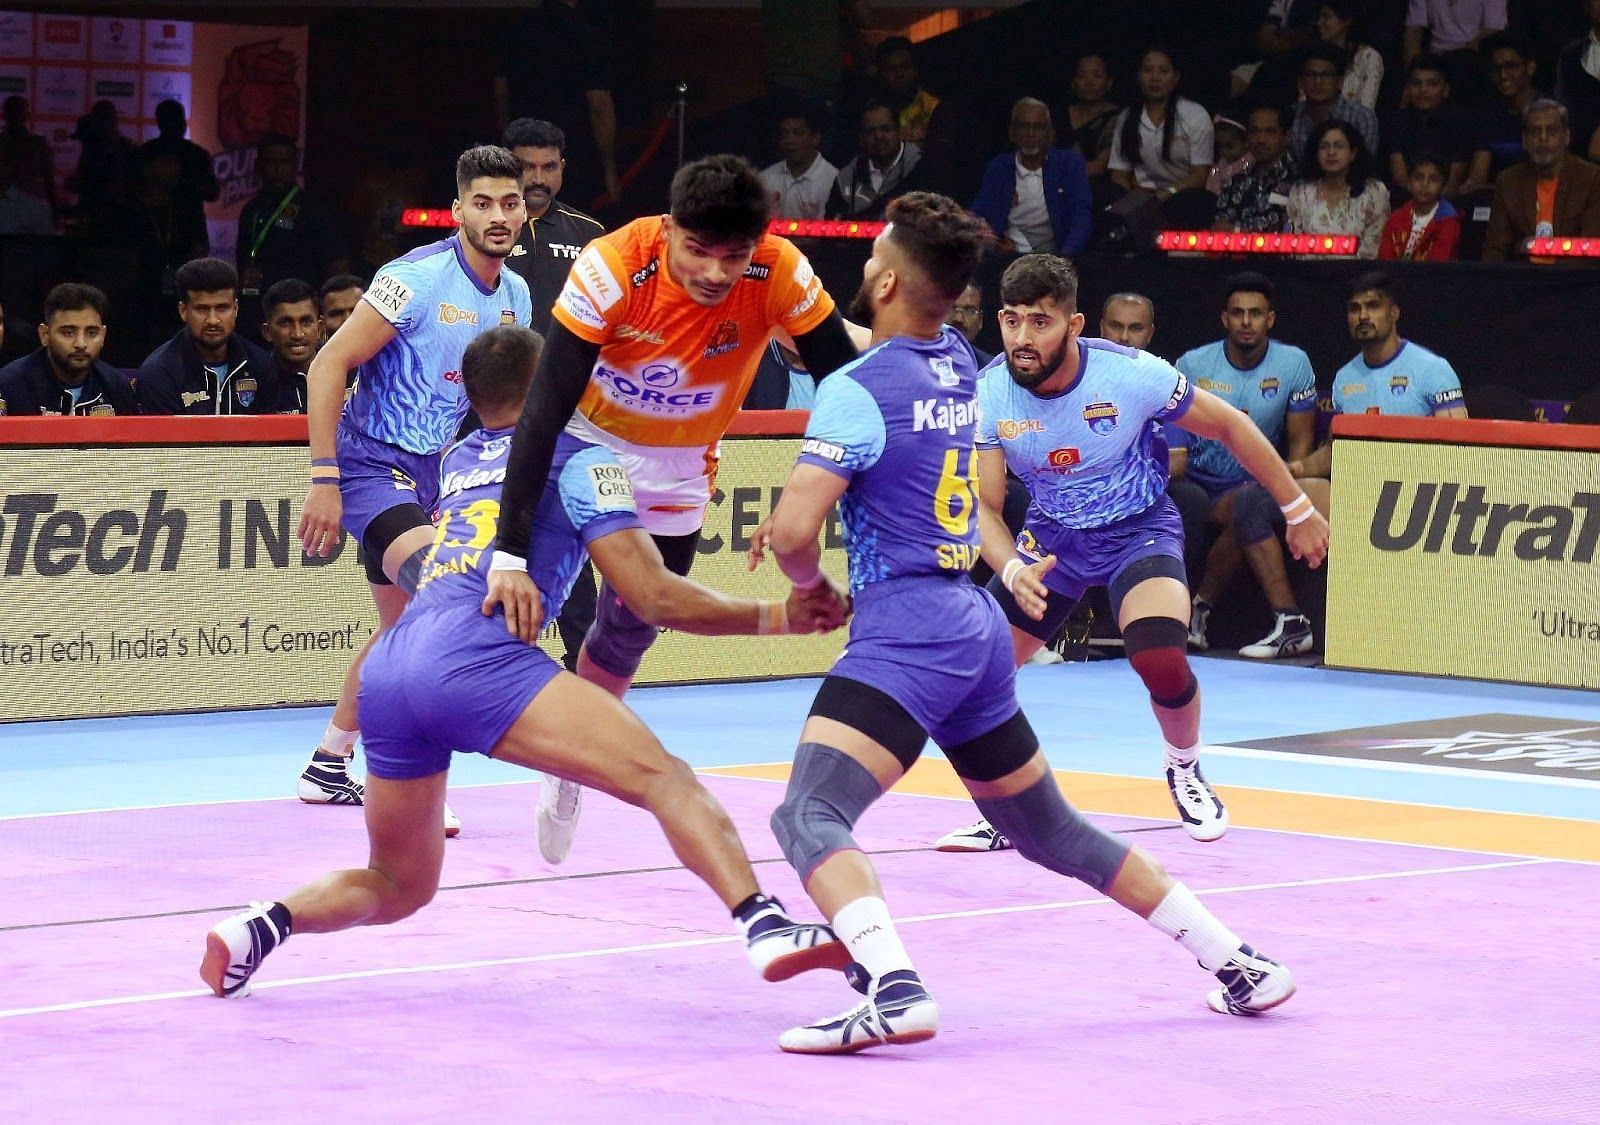 Shubam Shinde (right) in a chain tackle with Darpan against Pankaj Mohite (Credits: PKL)